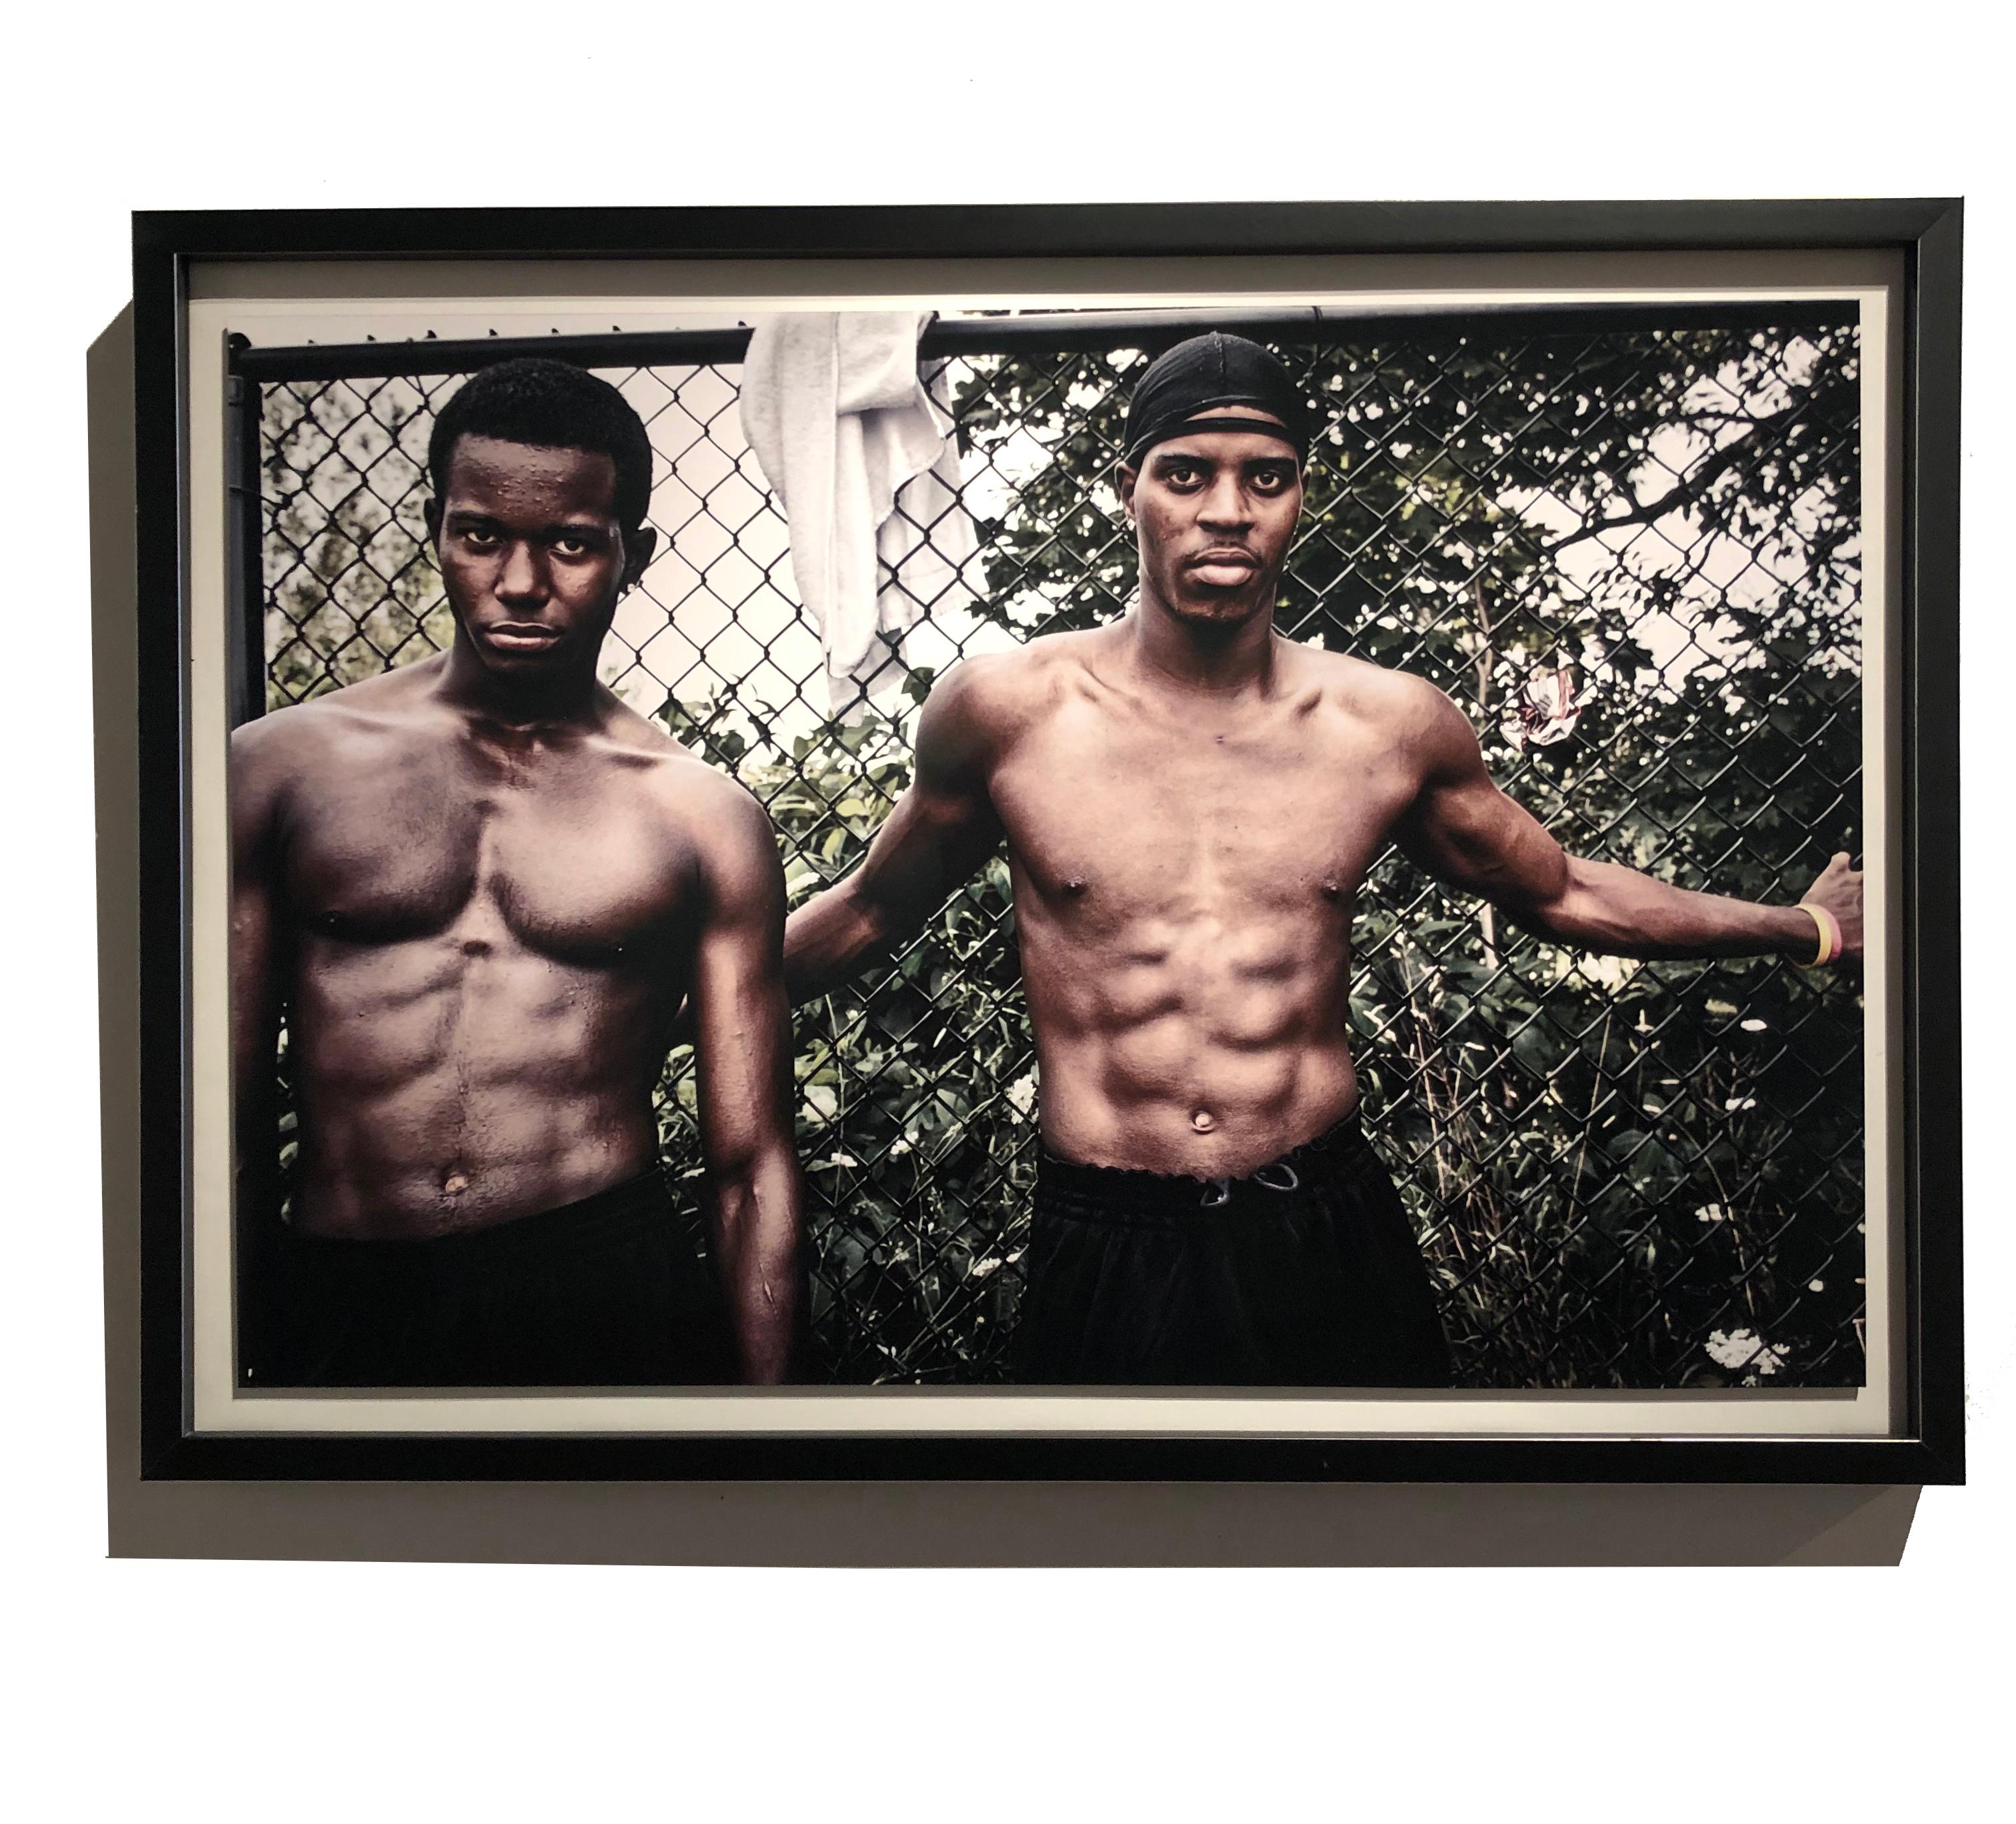 Street photography two young men, Ever Onward I, No. 22, C Print - Contemporary Photograph by Tice Lerner